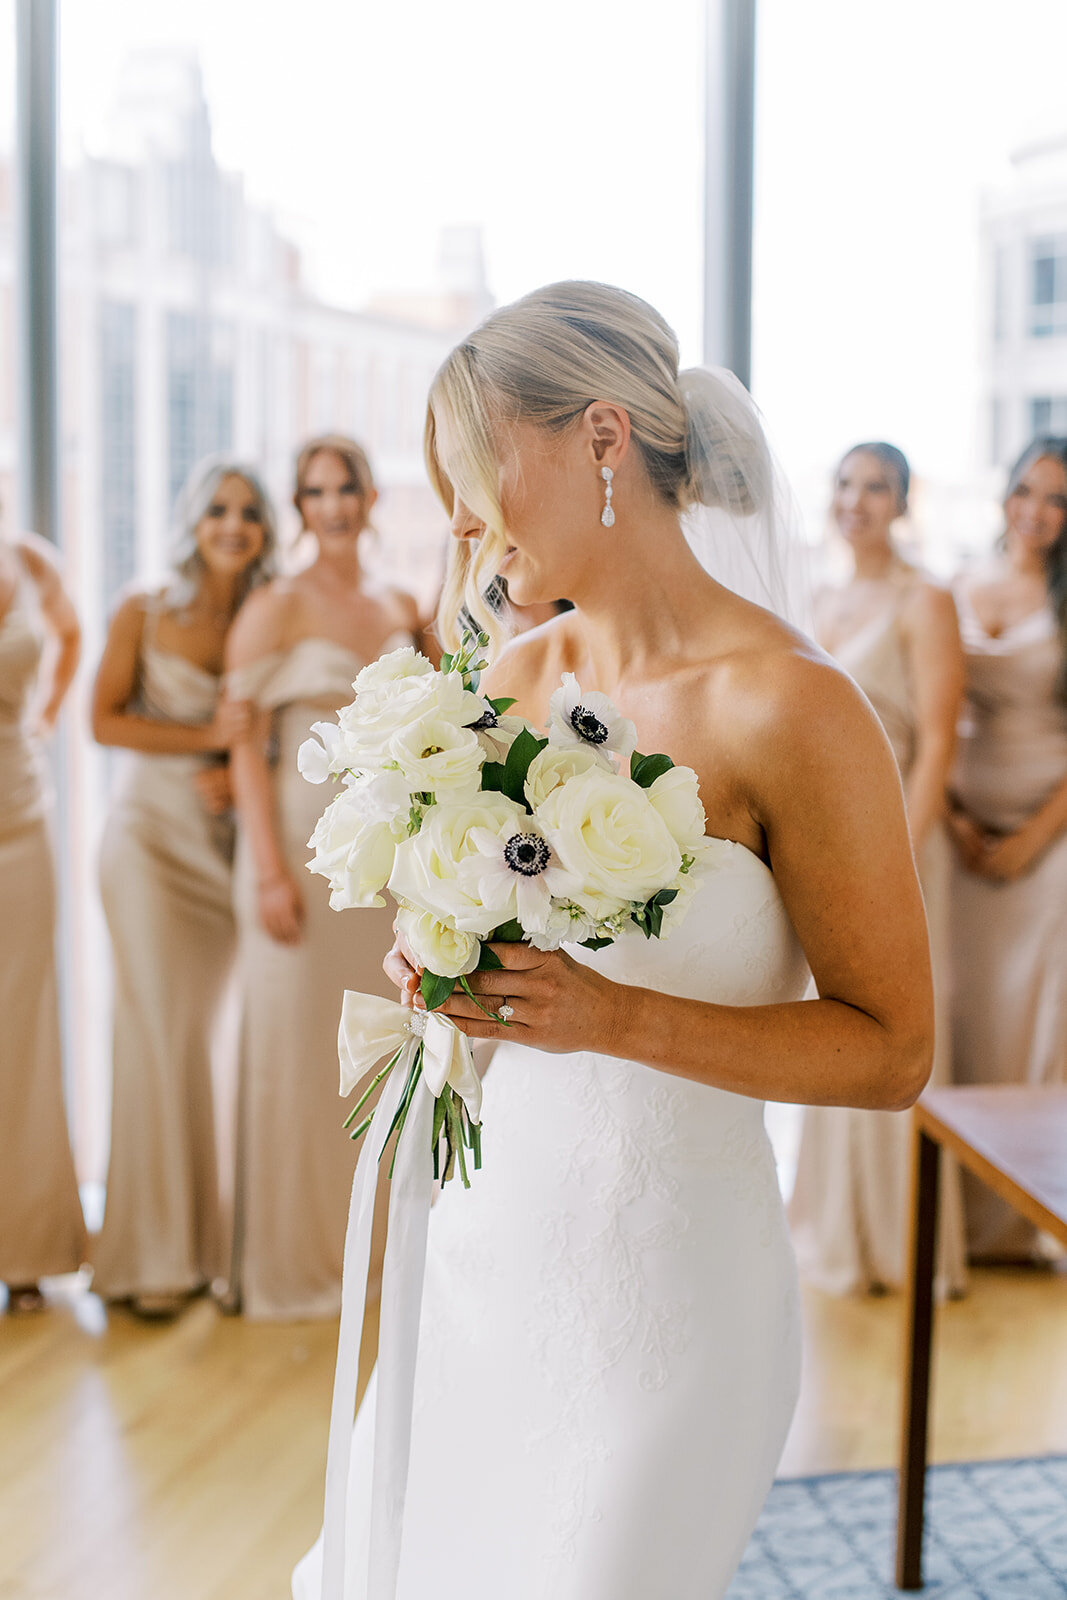 Bride with a white bouquet